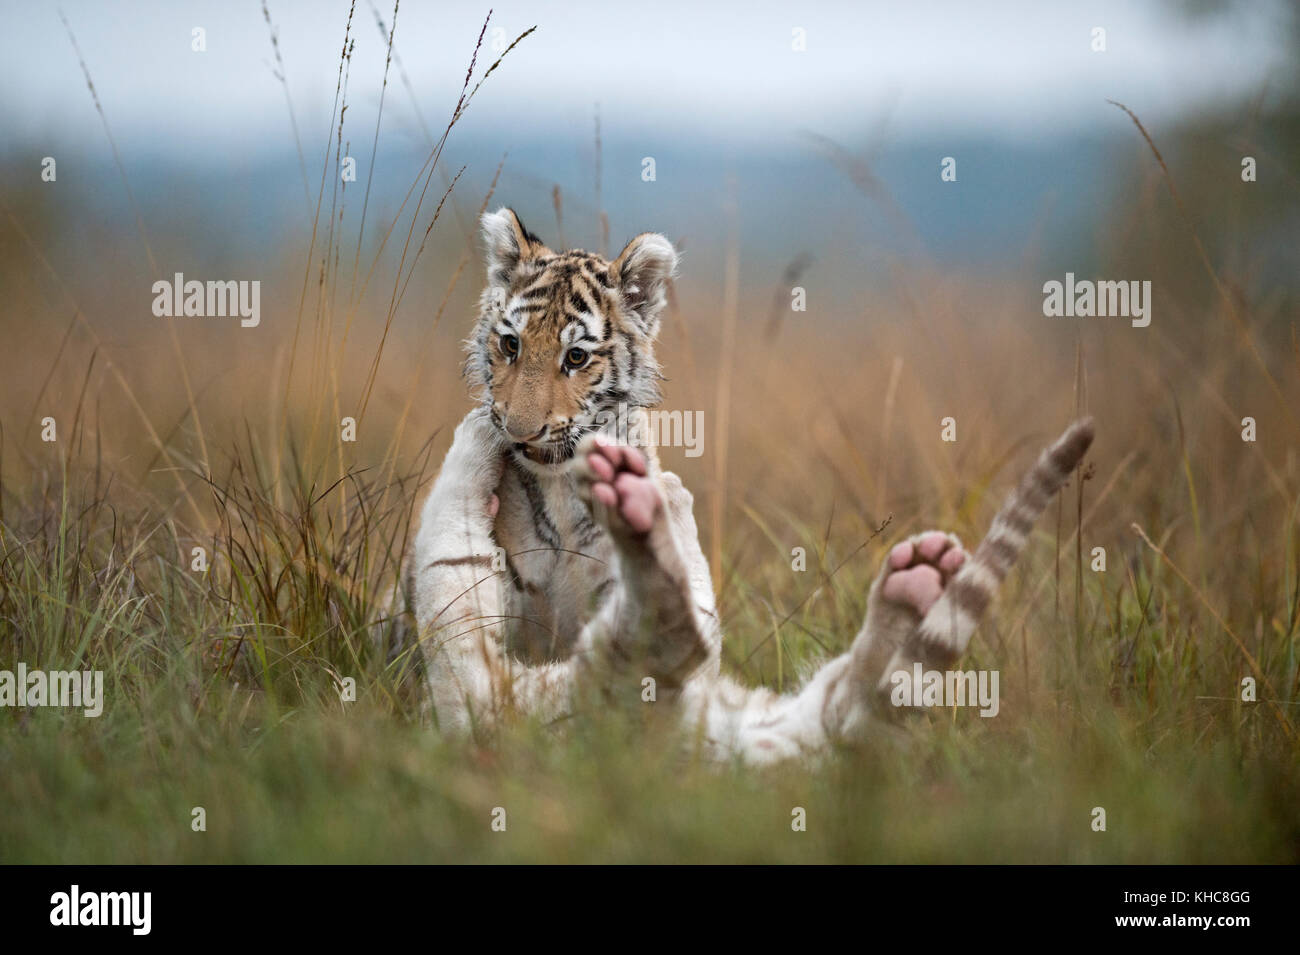 Royal Bengal Tigers ( Panthera tigris ), young cubs, siblings, playing, wrestling, romping in high grass, typical natural surrounding, funny kitten. Stock Photo